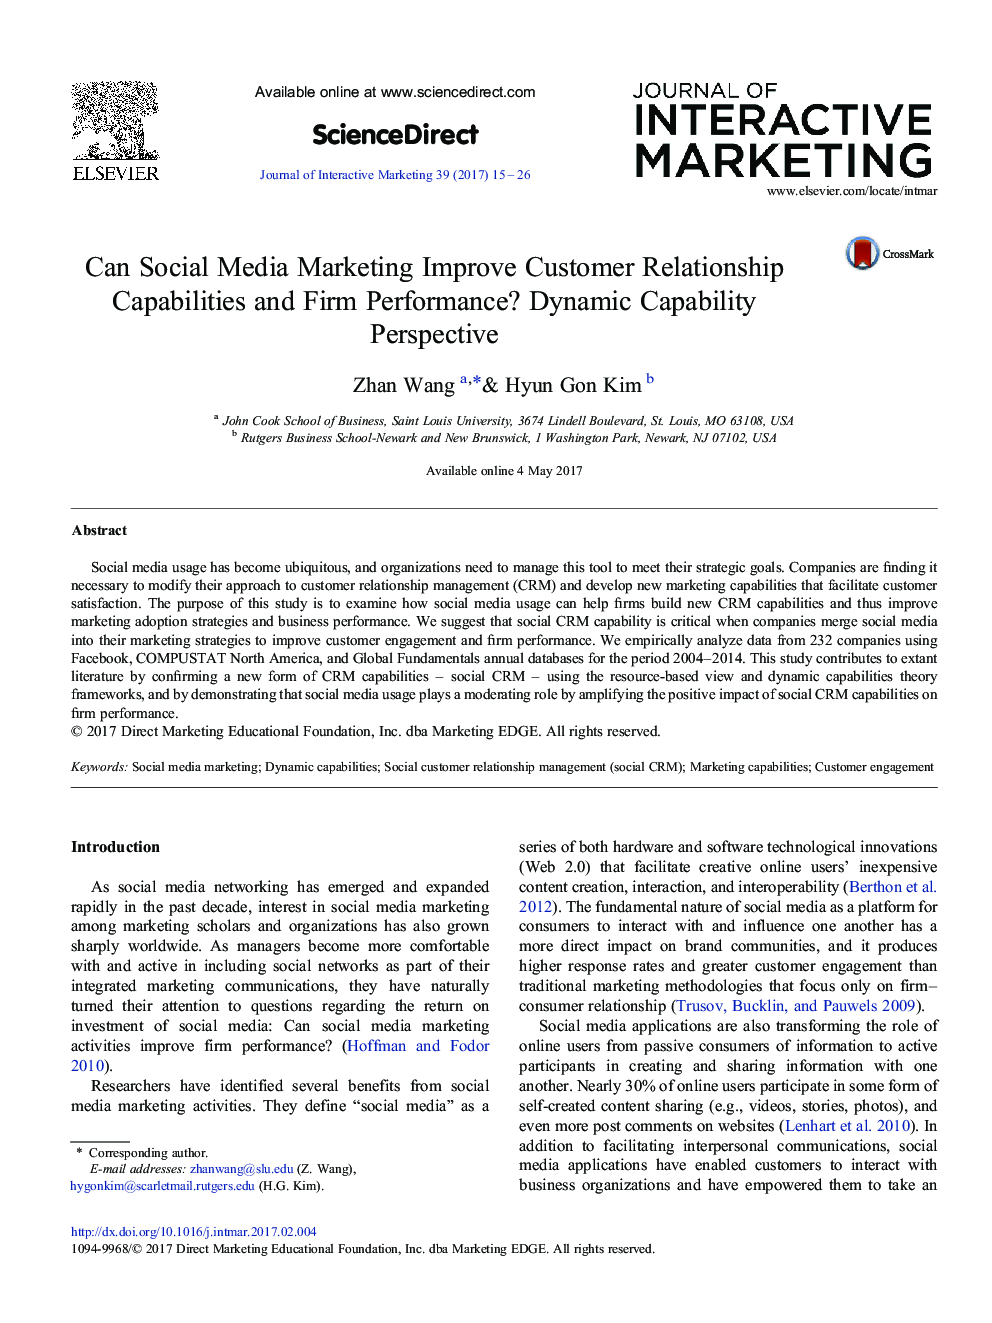 Can Social Media Marketing Improve Customer Relationship Capabilities and Firm Performance? Dynamic Capability Perspective